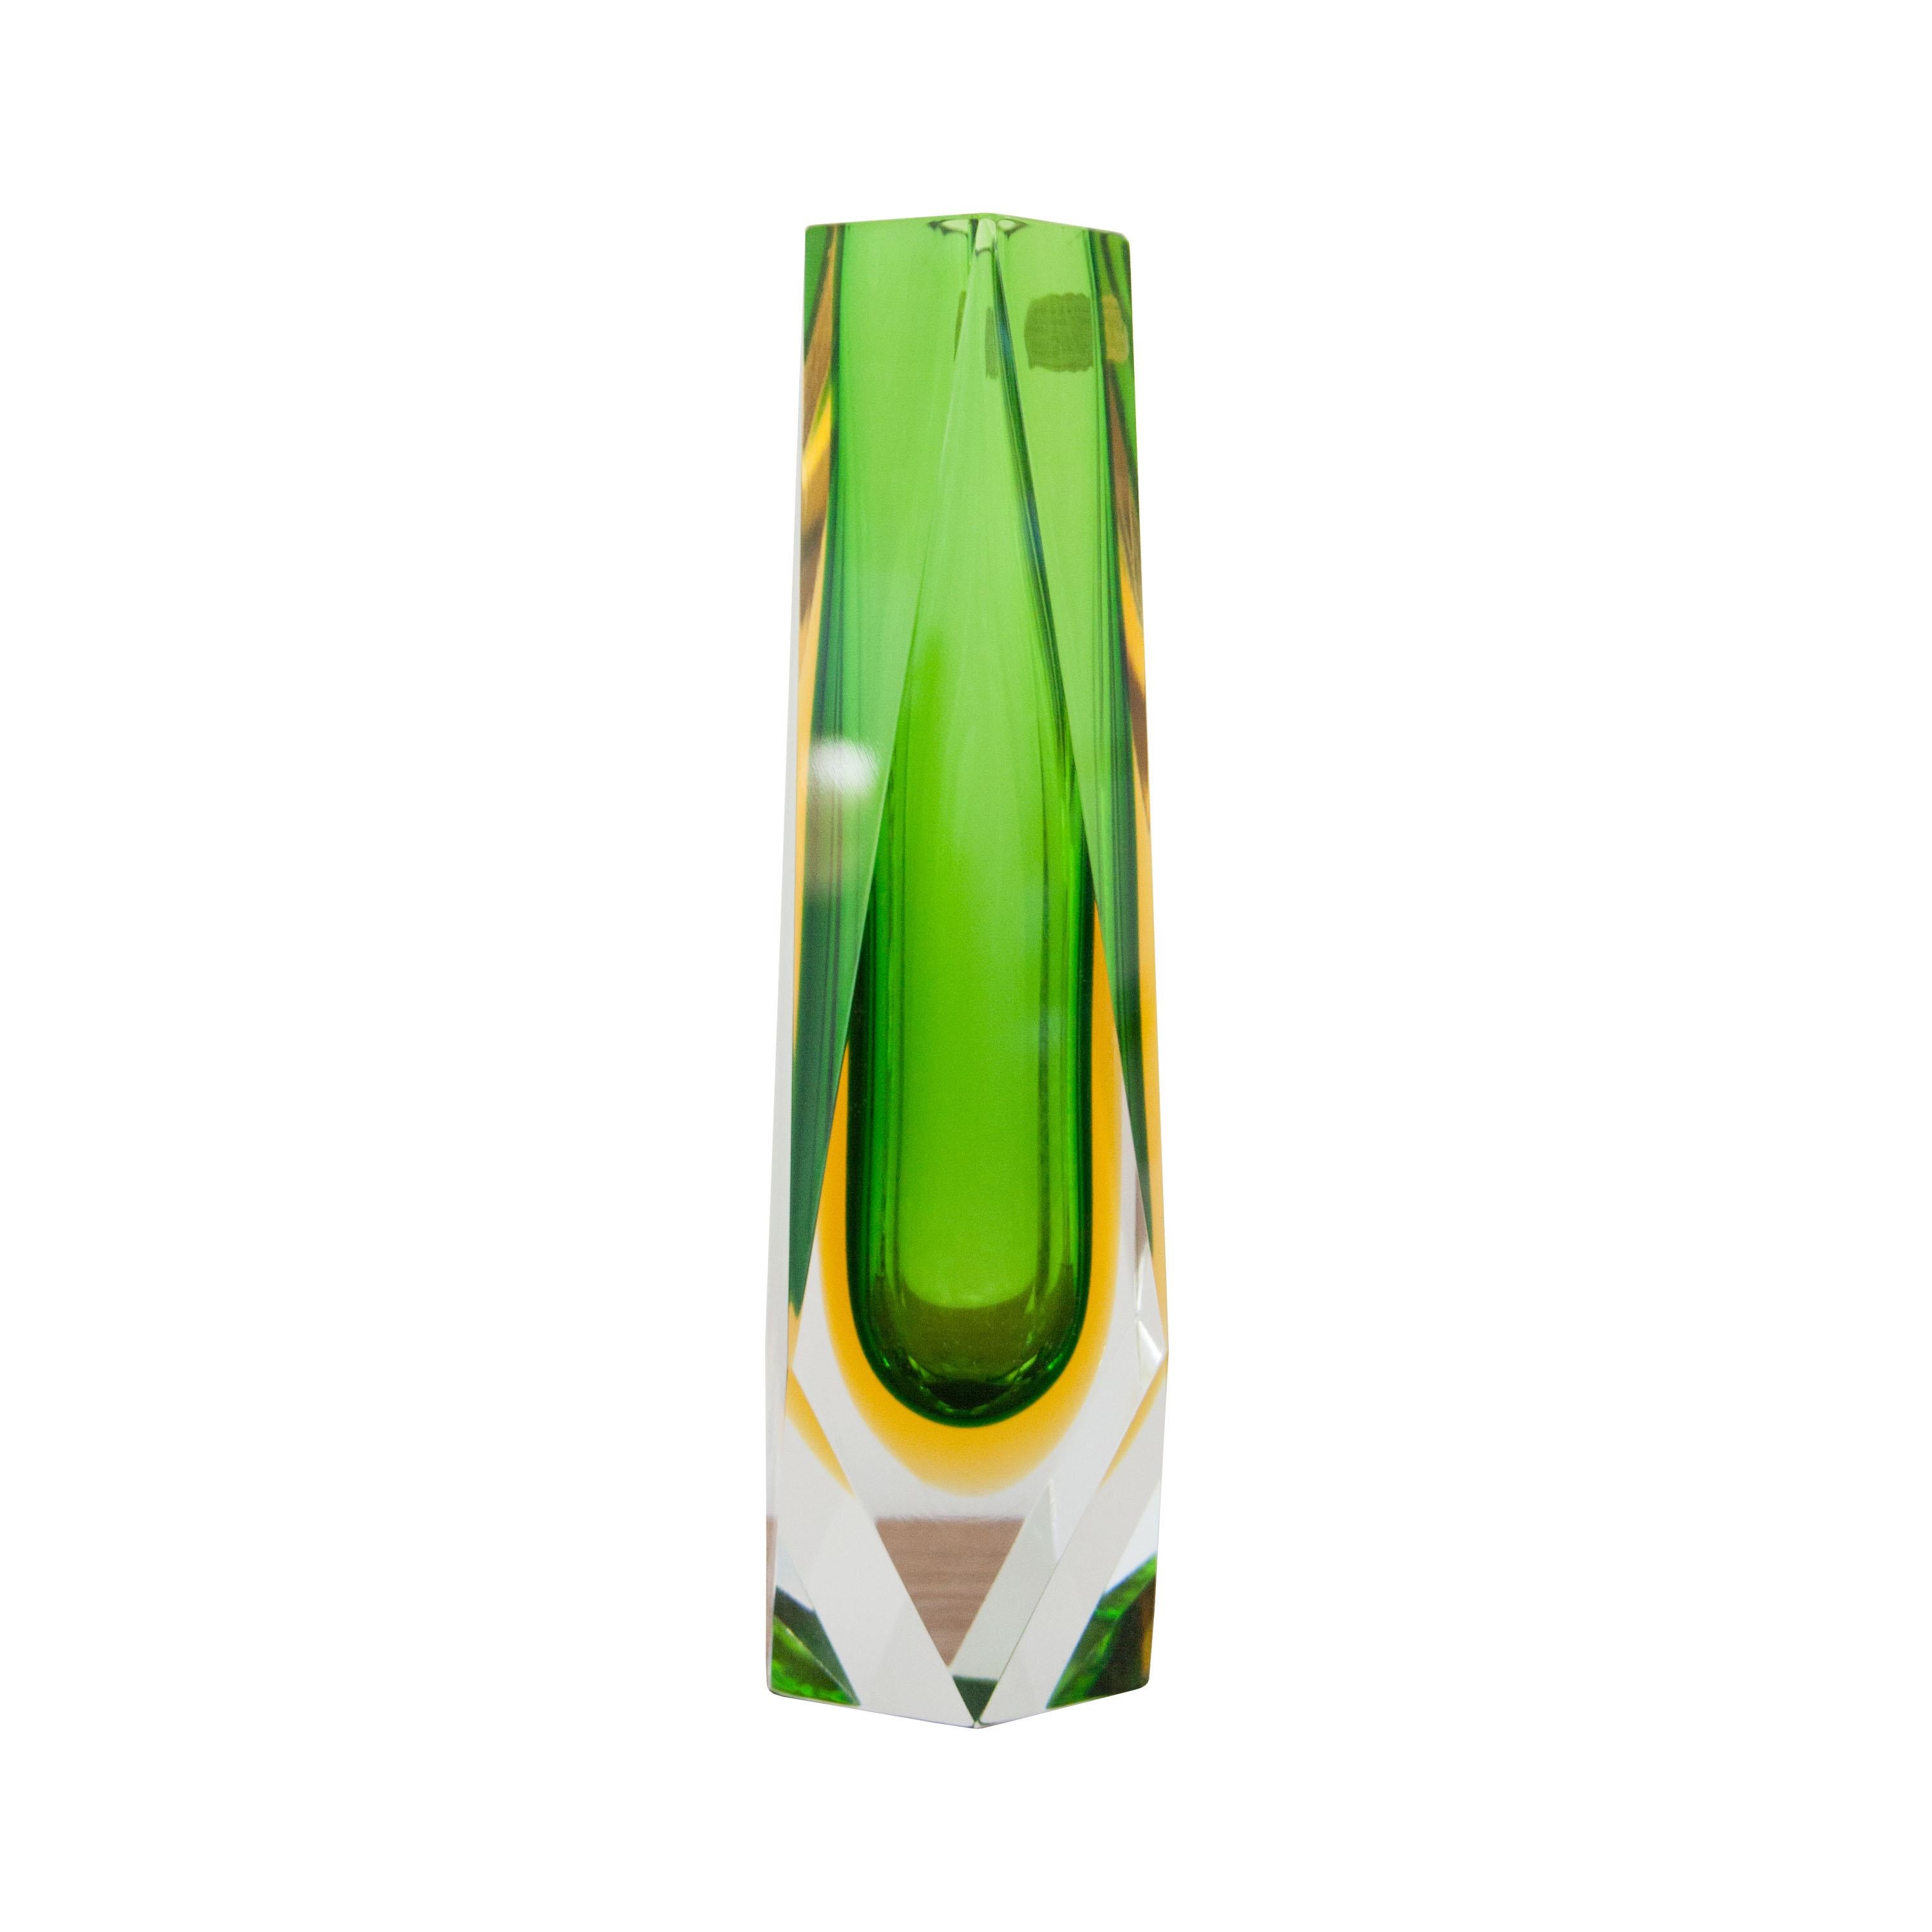 Italian vase designed by Flavio Poli and edited by Mandruzzato. Hand-crafted faceted Murano glass in green.